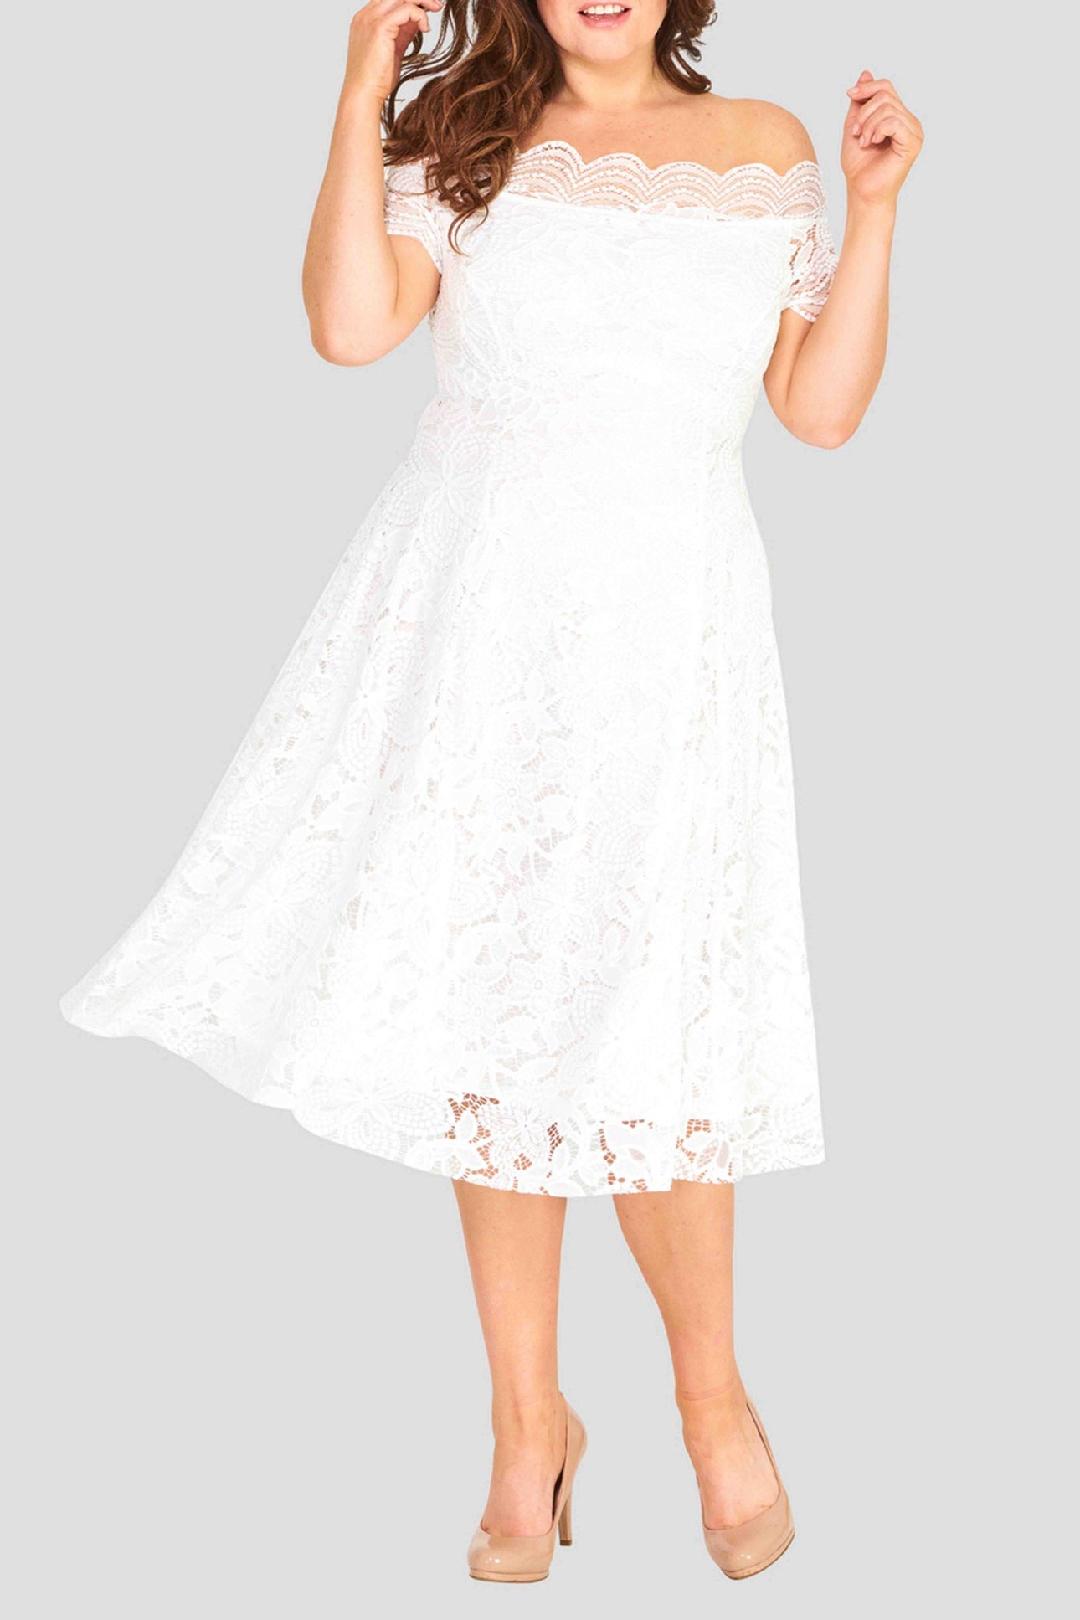 Awesome Off Shoulder  Dress (white)